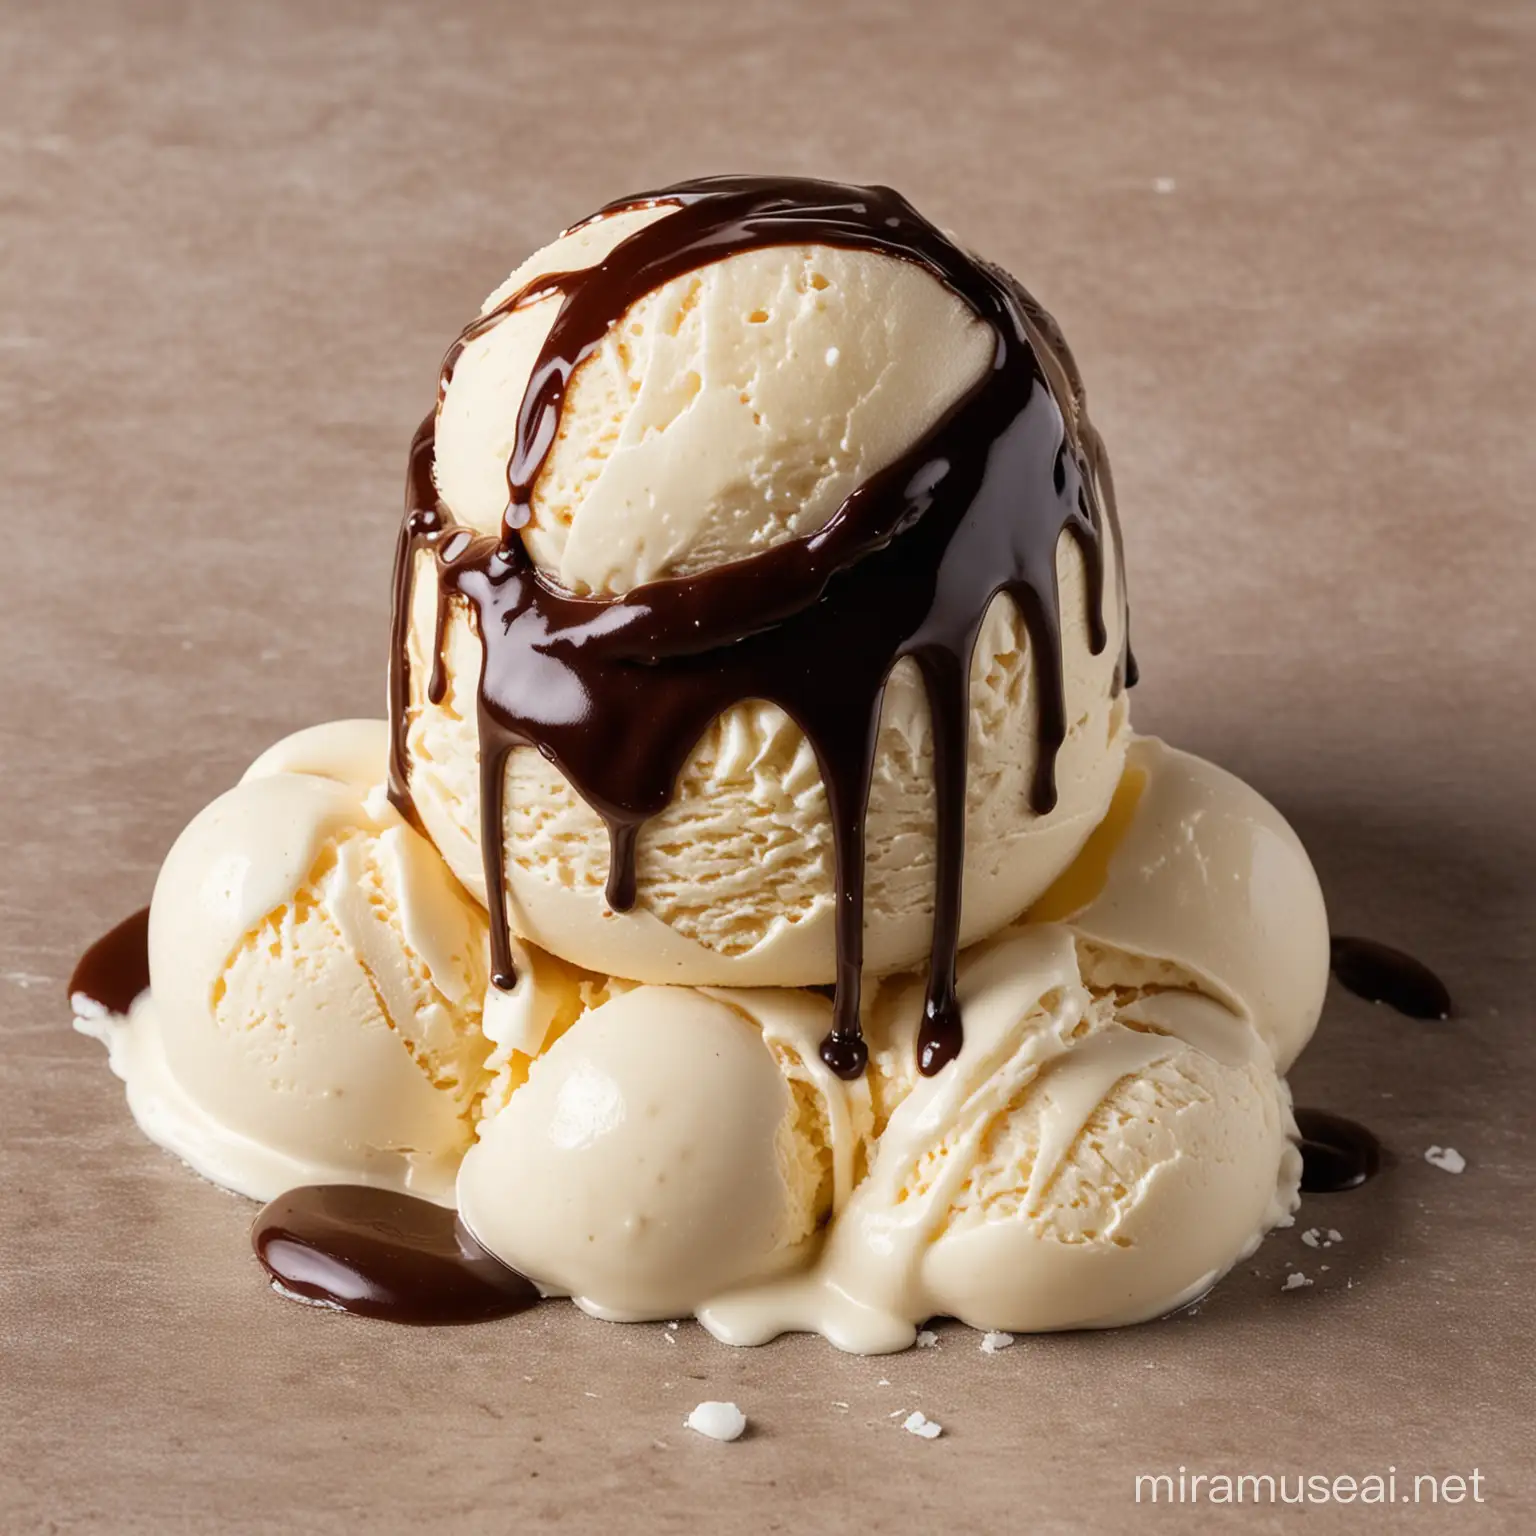 A ball of milk ice cream with chocolate sauce on top, without a background
